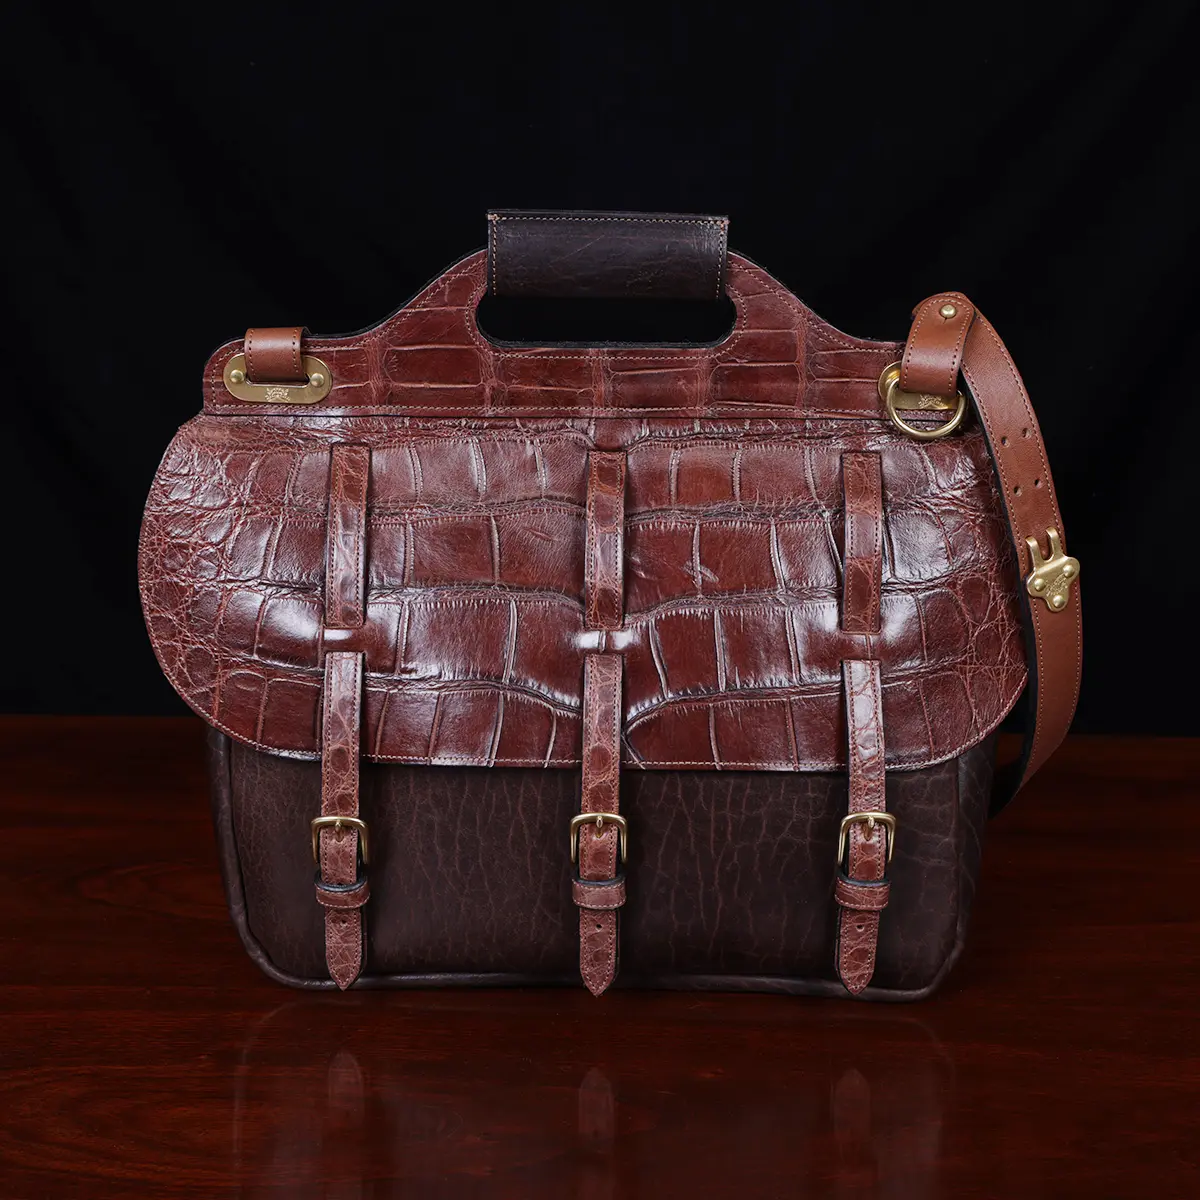 No. 1 Saddlebag Briefcase in dark Tobacco Brown American Buffalo trimmed with Alligator - serial number 004 - front view